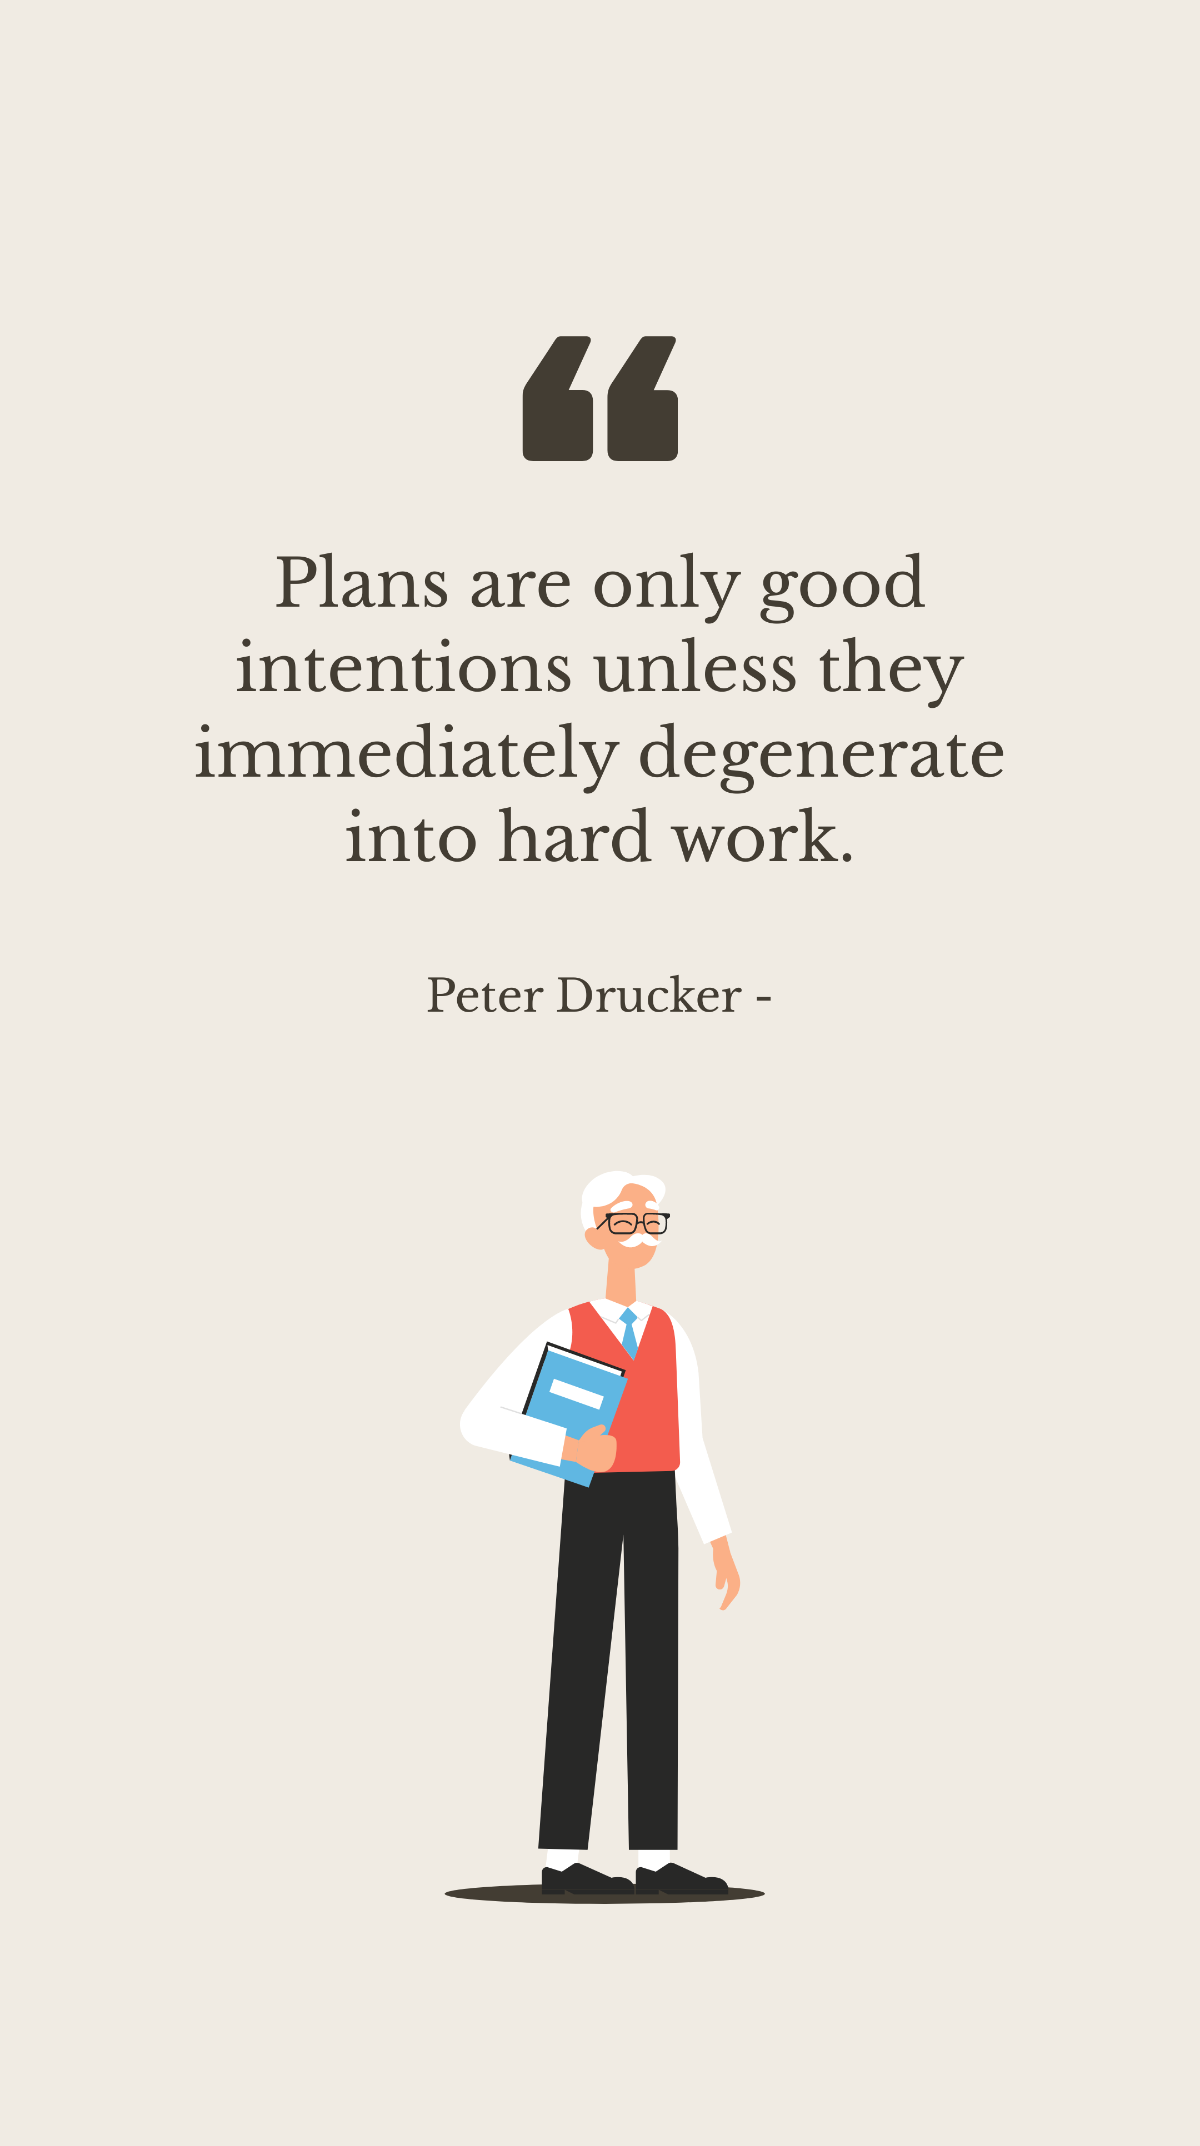 Free Peter Drucker - Plans are only good intentions unless they immediately degenerate into hard work. Template